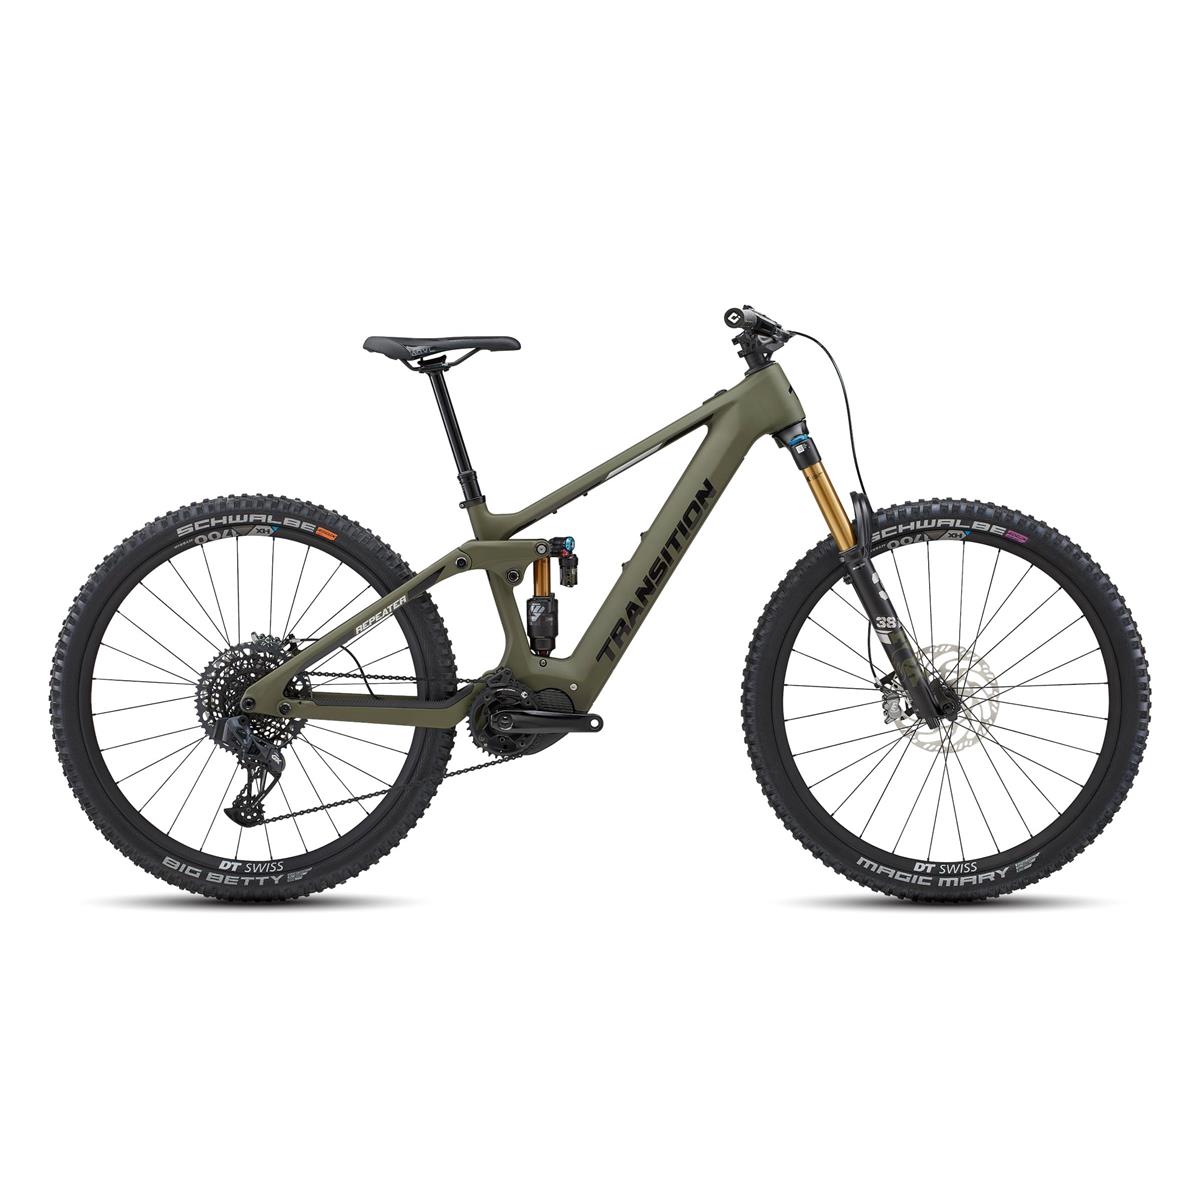 Repetidor Carbono AXS 29'' 160mm 12s 630Wh Shimano EP8 Mossy Green Talla M